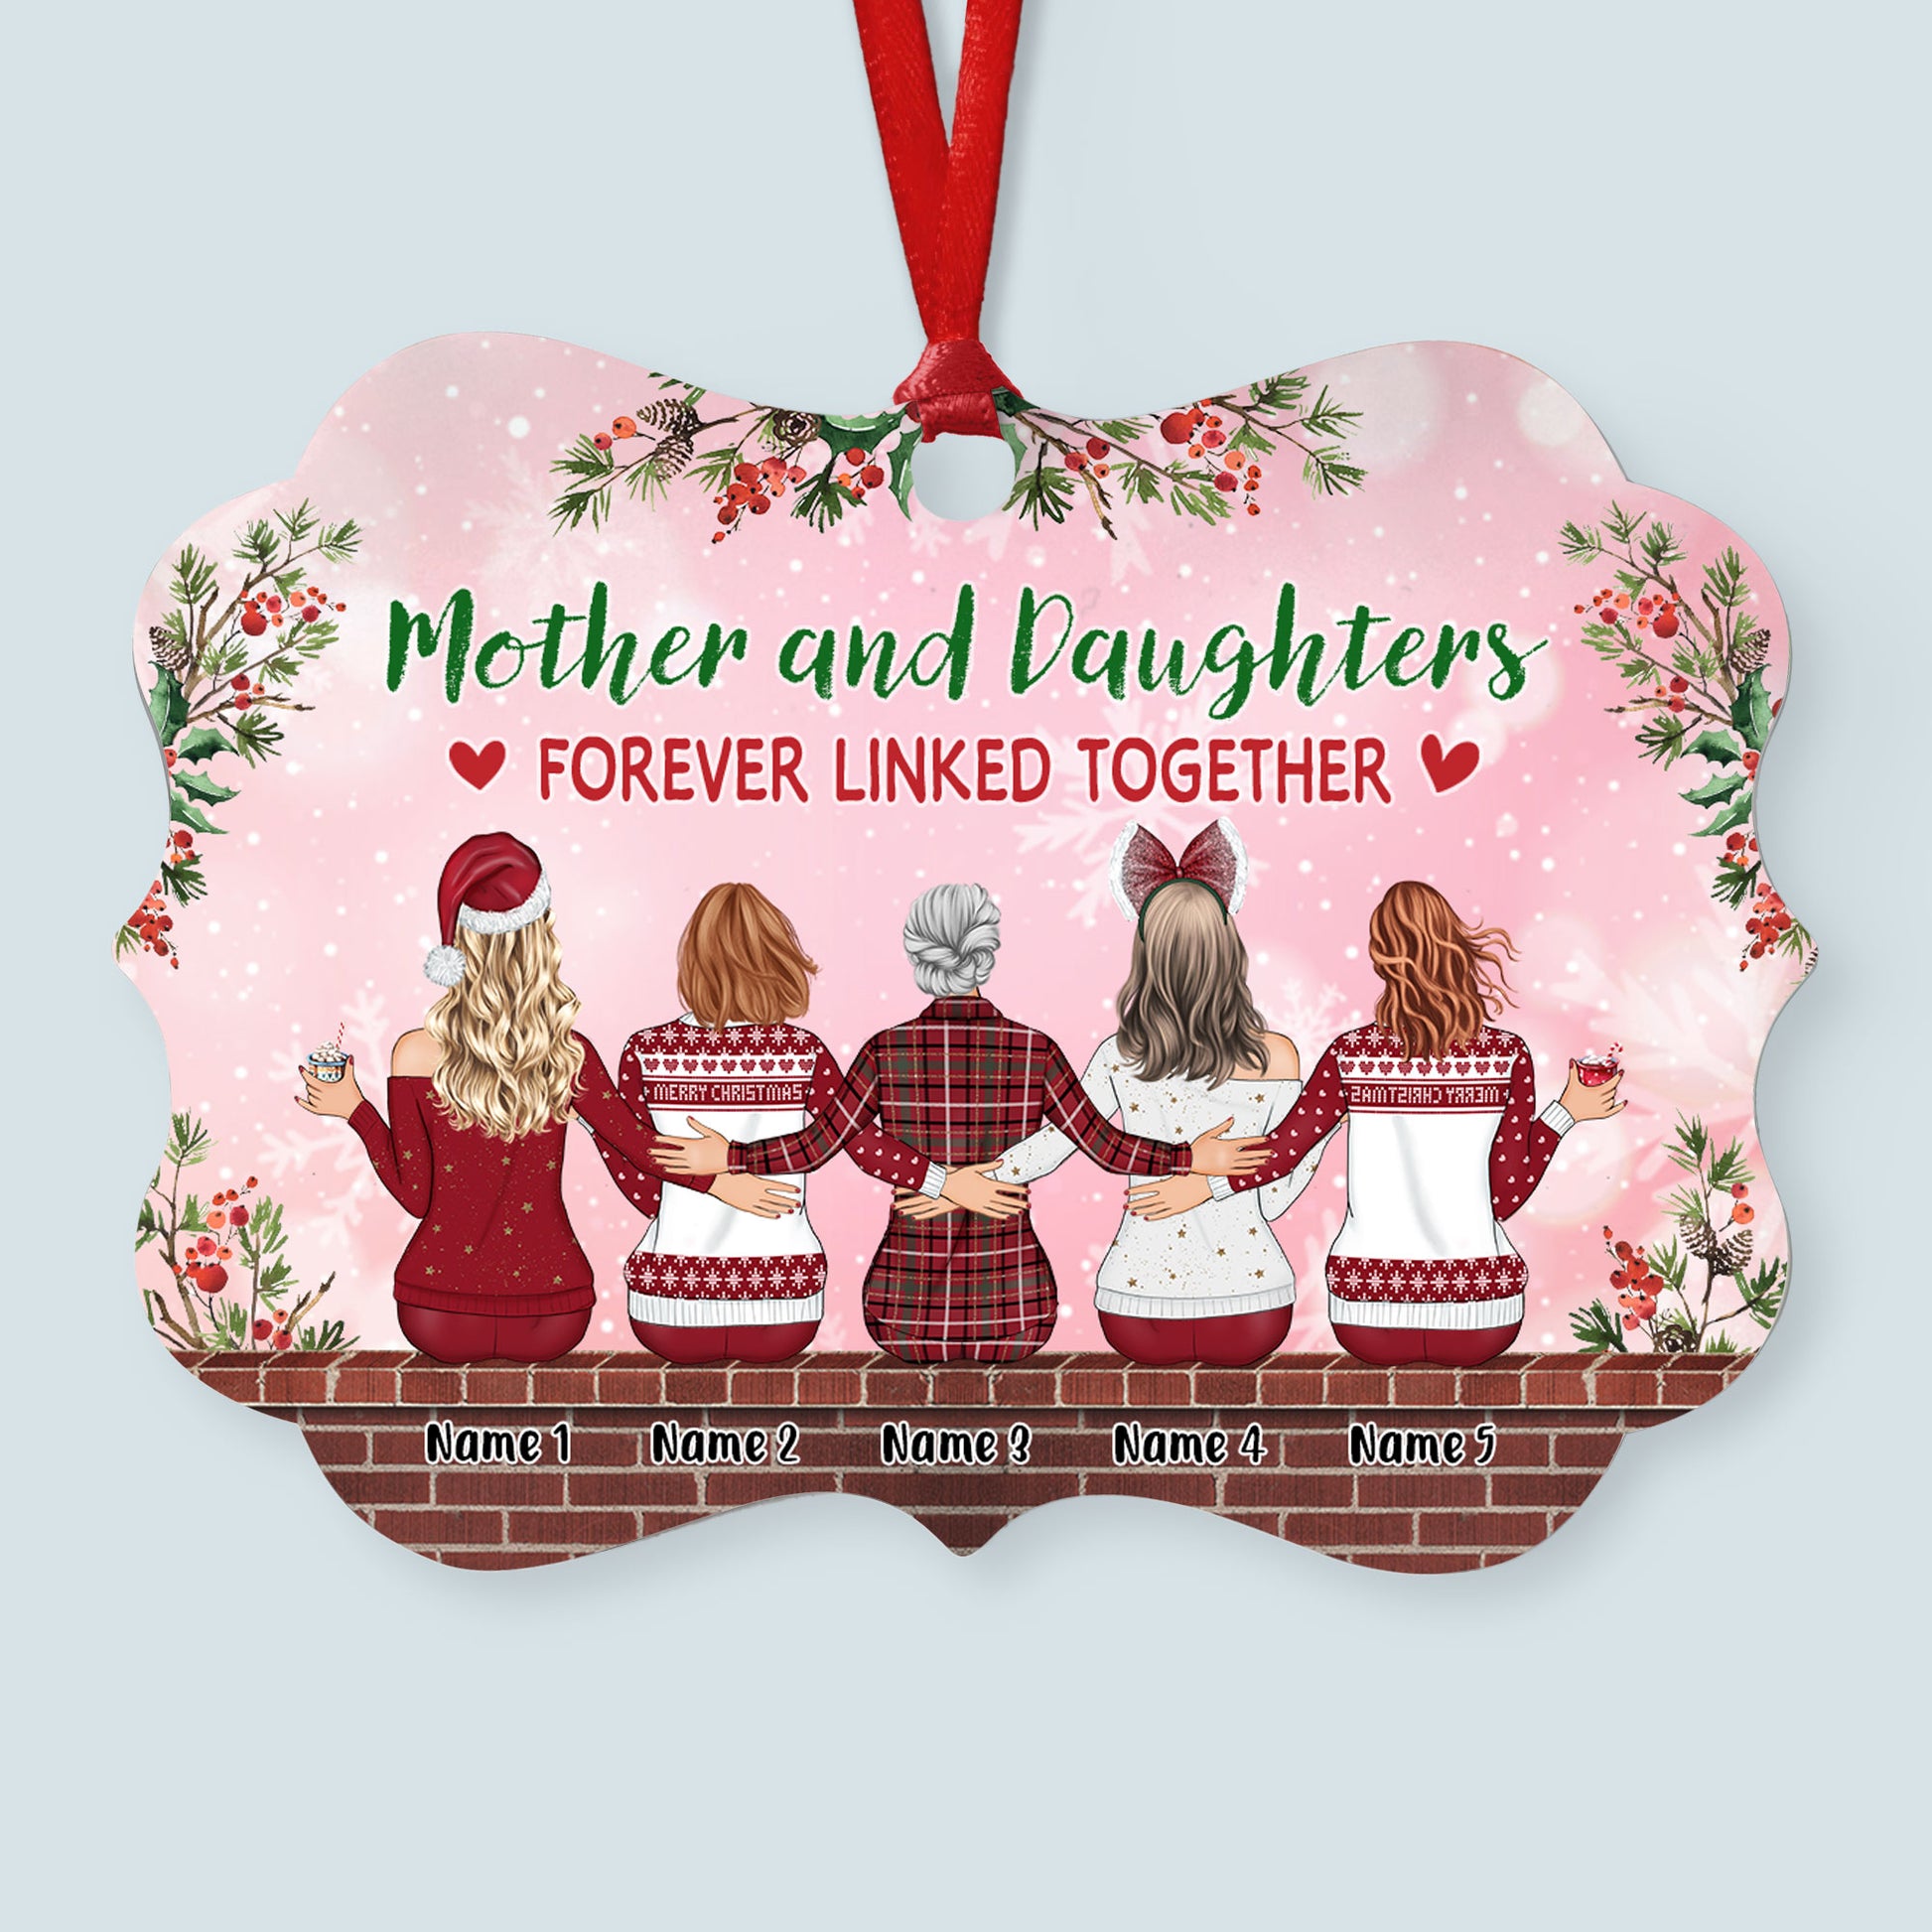 https://macorner.co/cdn/shop/products/Mother-And-Daughters-Forever-Linked-Together-Personalized-Aluminum-Ornament-Christmas-Gift-For-Moms_-Daughters-1.jpg?v=1636081373&width=1946